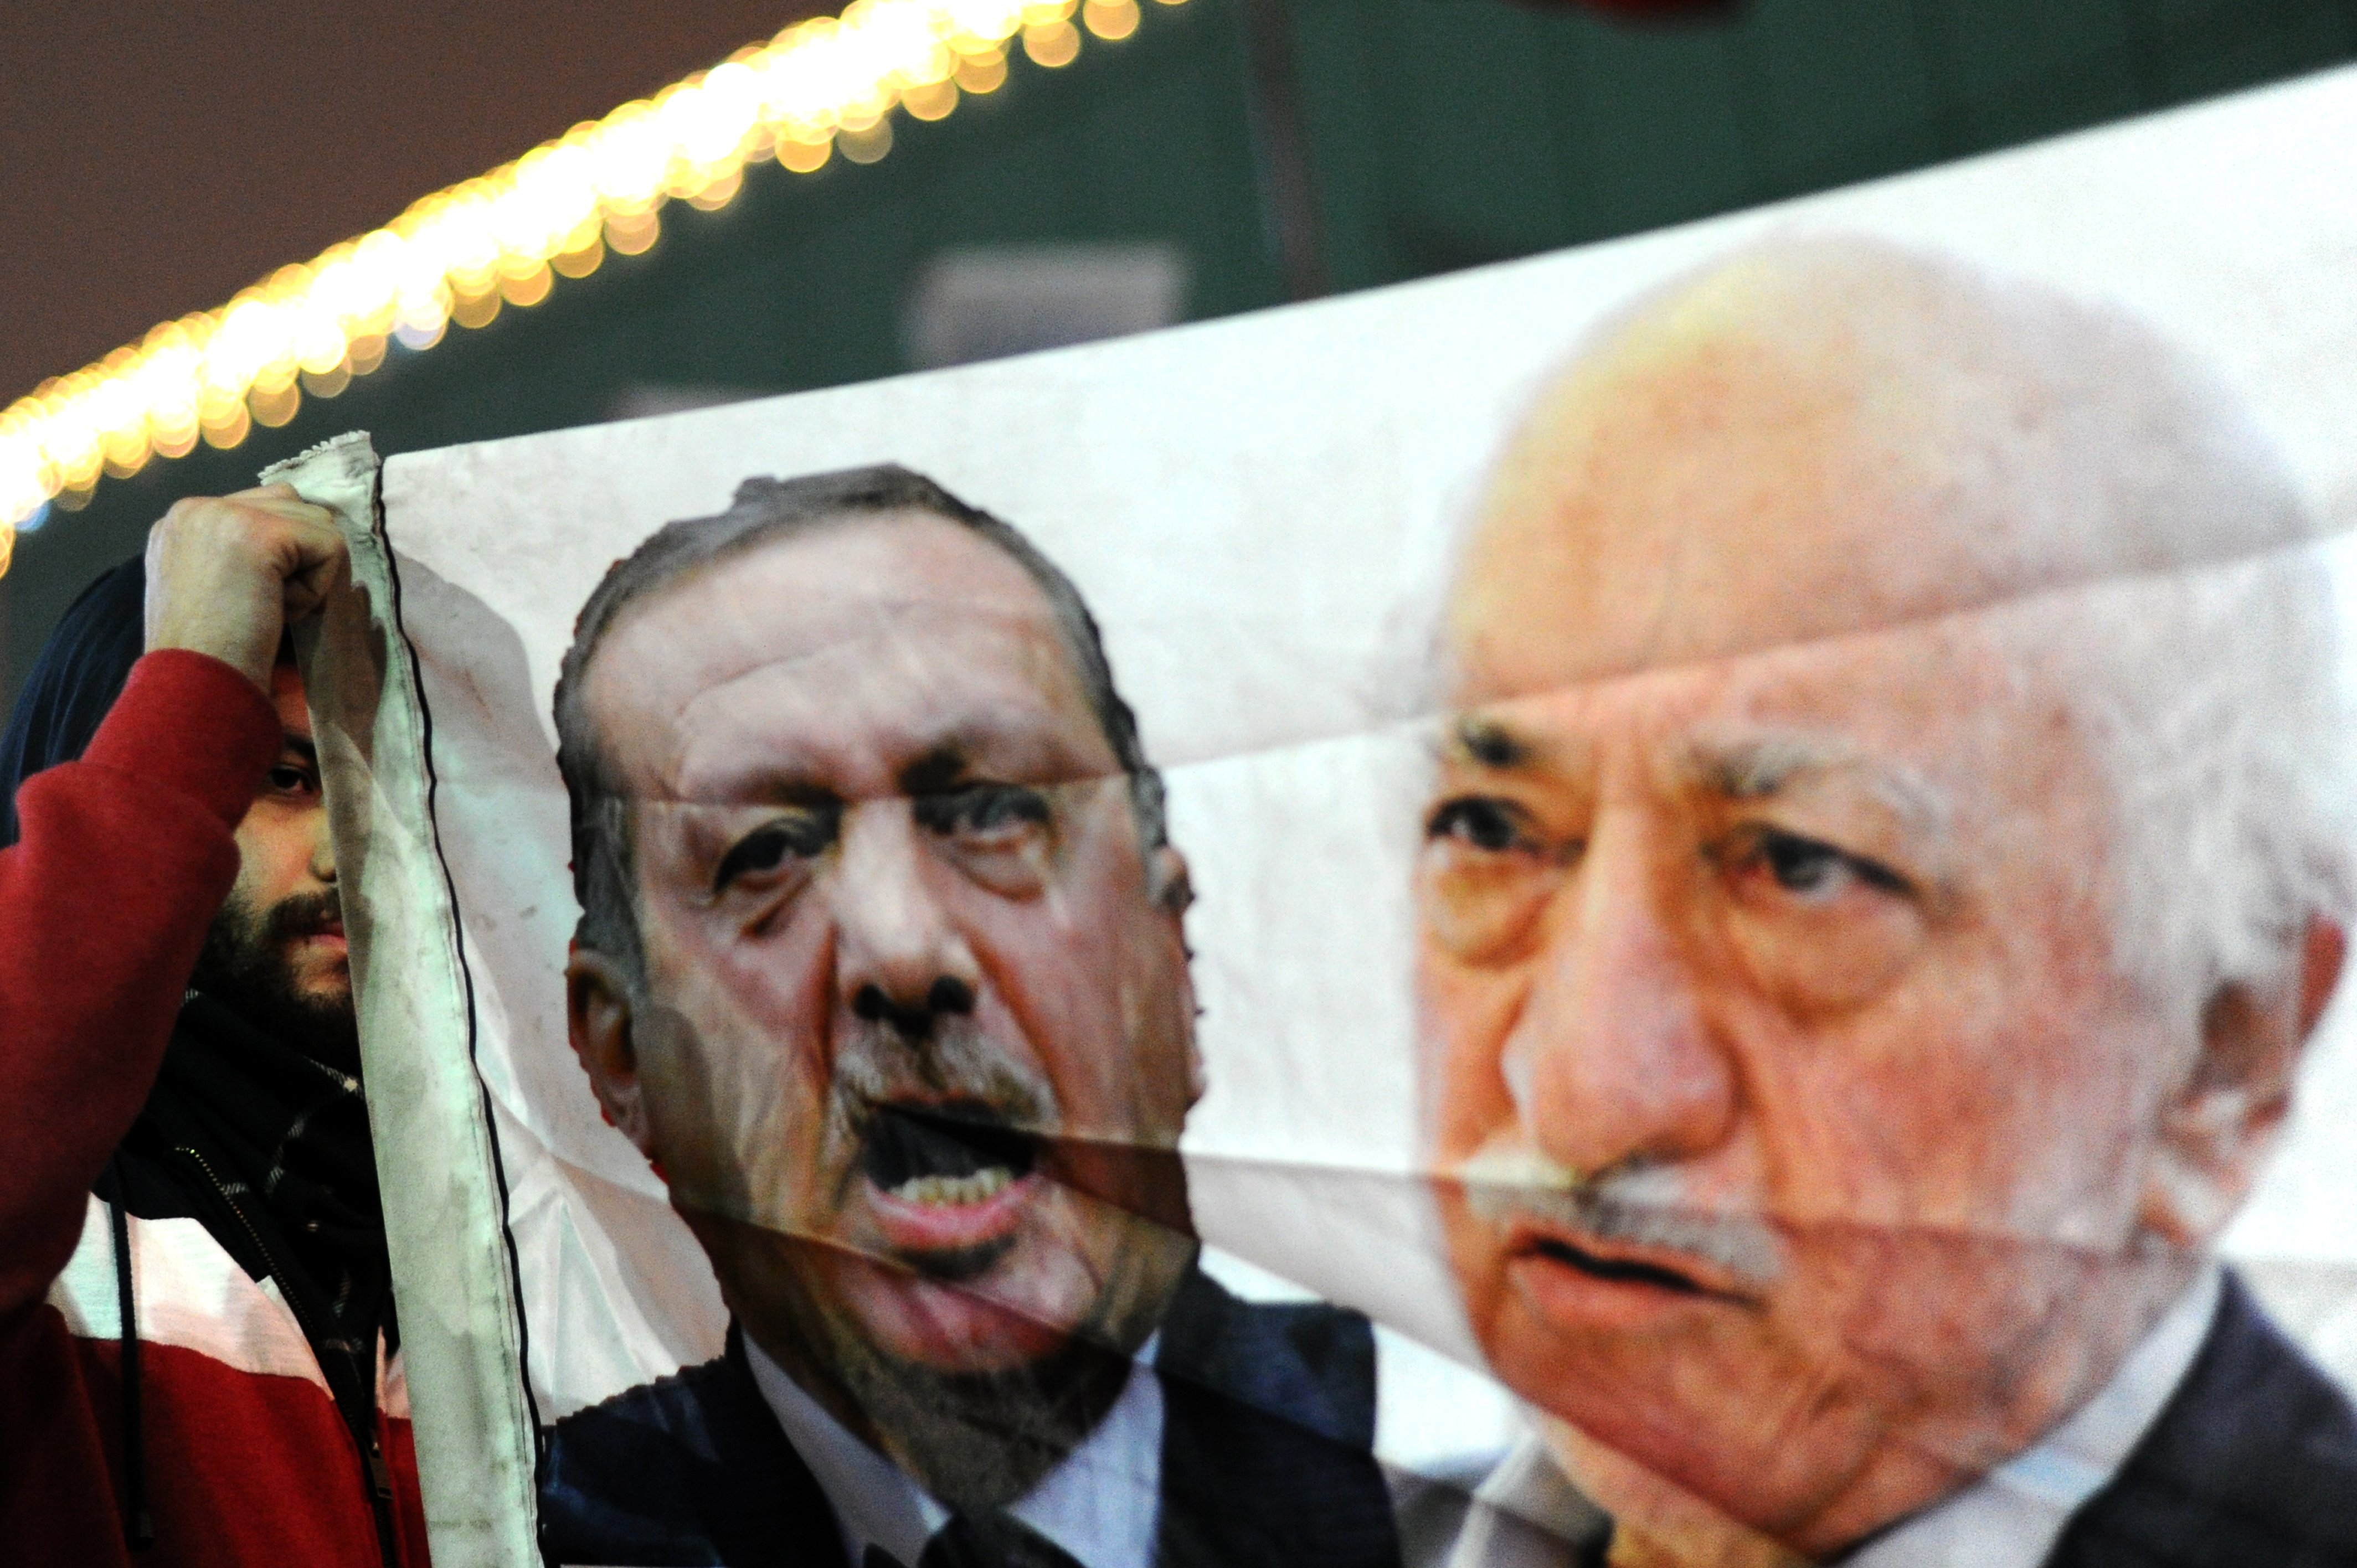 A Turkish protester (L) holds up a banner with pictures of Turkish Prime Minister Recep Tayyip Erdogan (C) and the United States-based Turkish cleric Fethullah Gulen (R) during a demonstration against goverment on December 30, 2013 in Istanbul. (Ozan Kose—AFP/Getty Images)